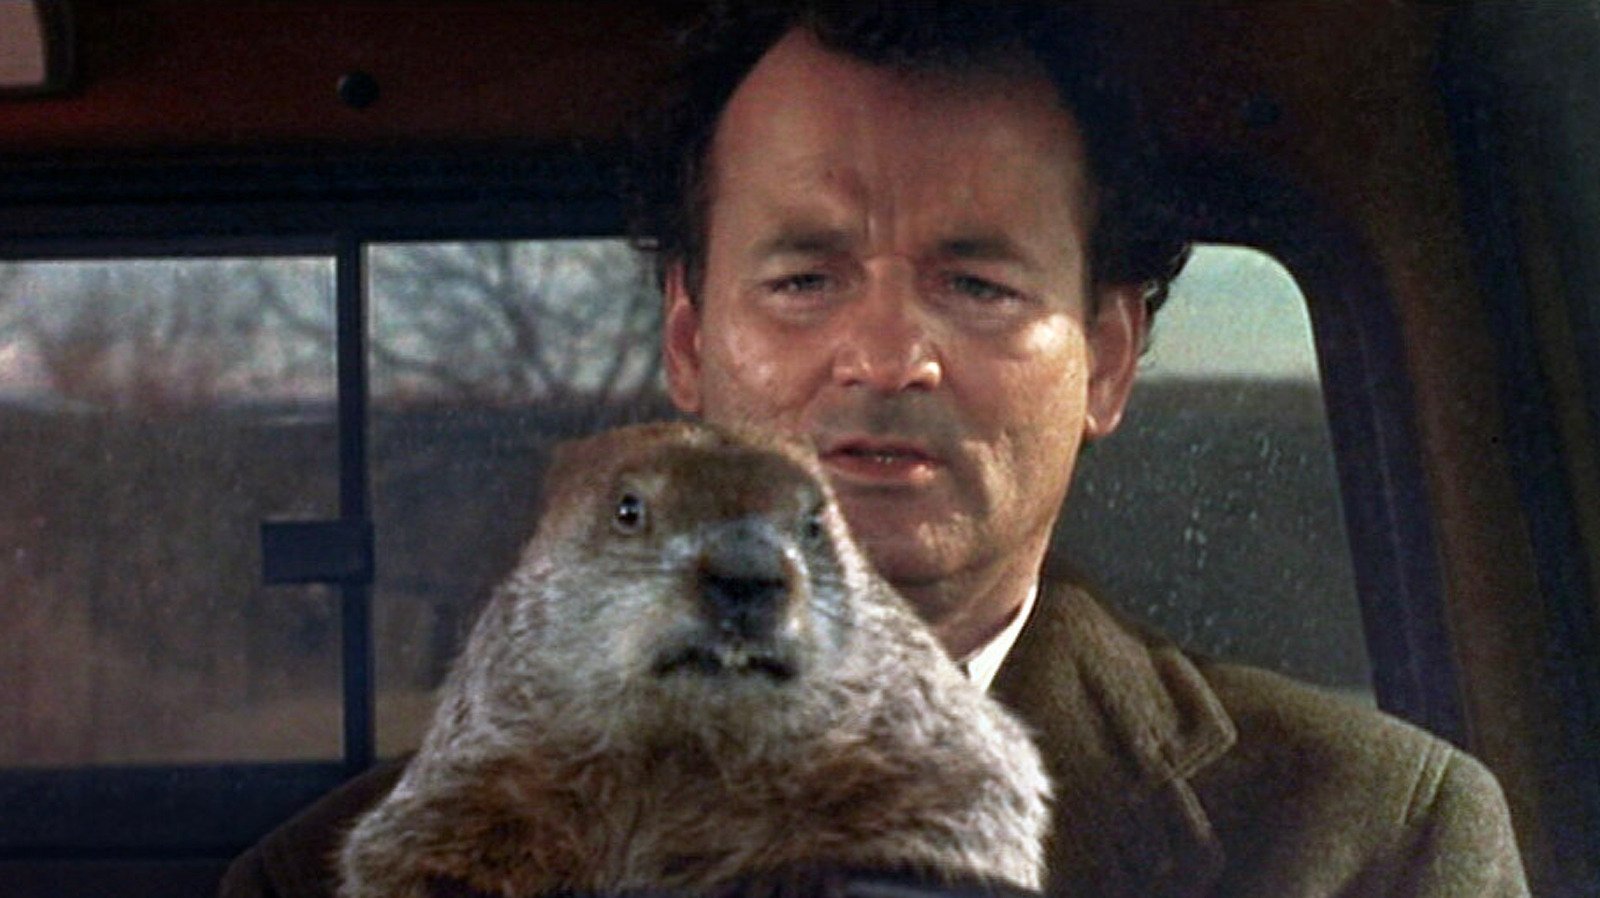 Stephen Sondheim Wanted To Turn Groundhog Day Into A Musical – Here's Why He Didn't